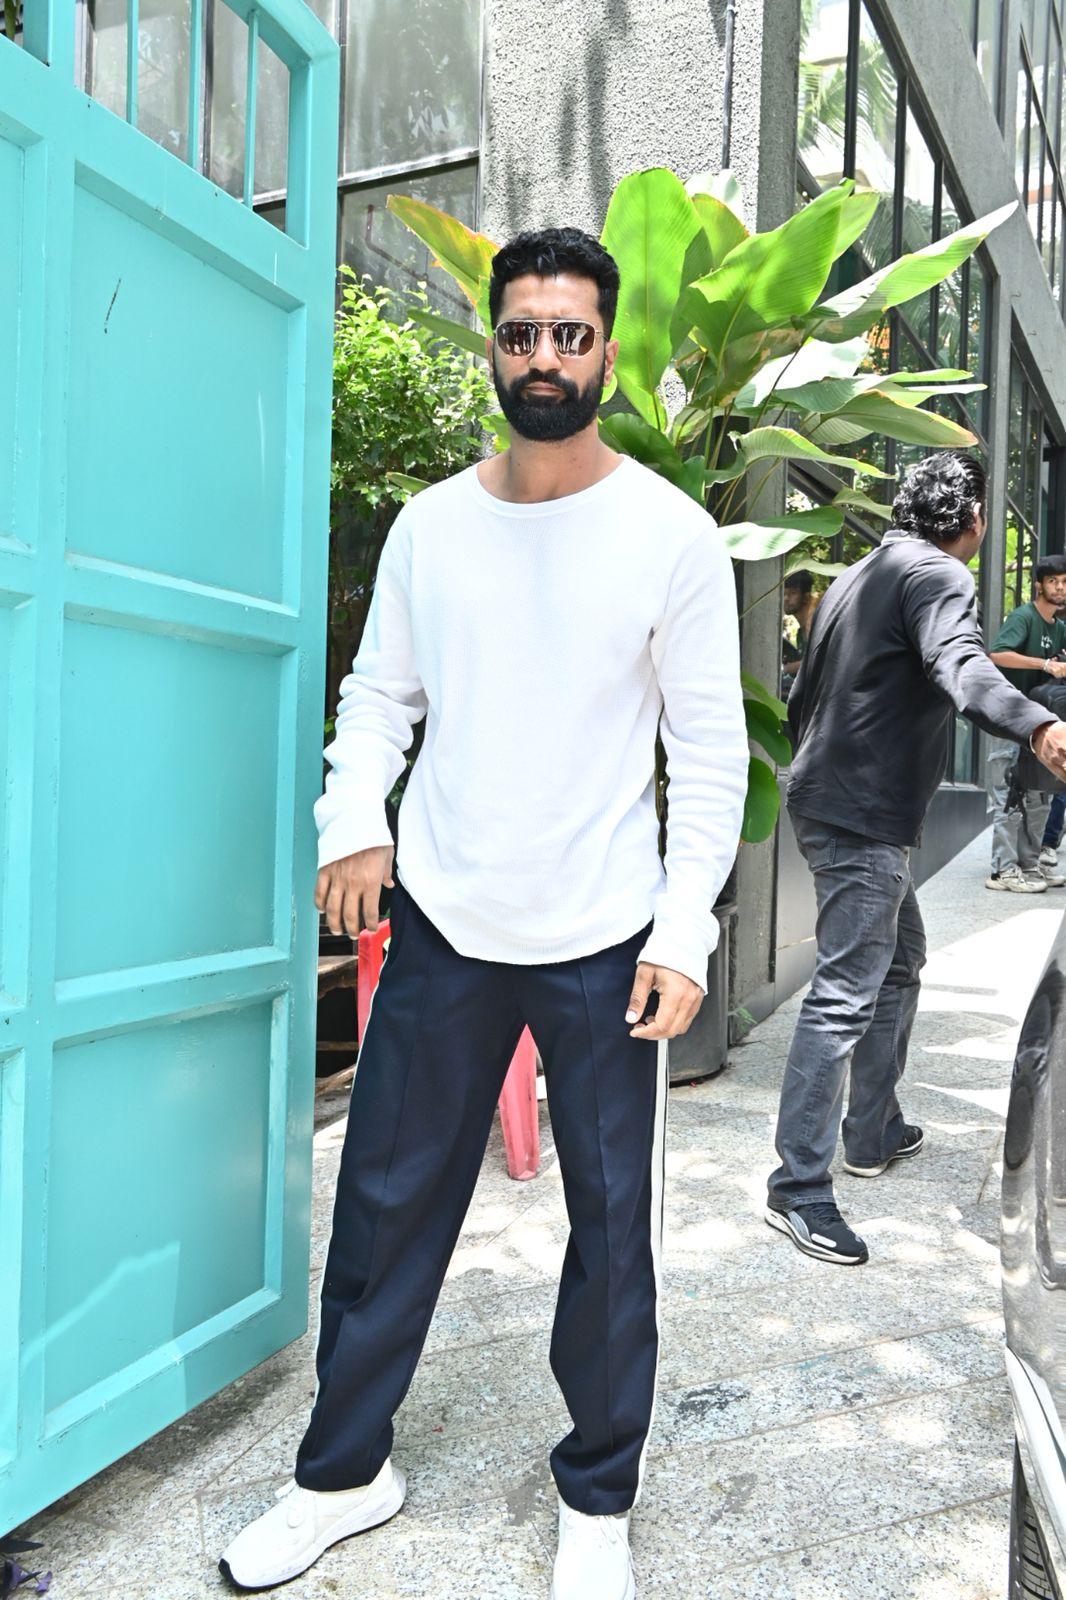 Vicky Kaushal was snapped in the city as he came out wearing a simple white T-shirt and black jeans